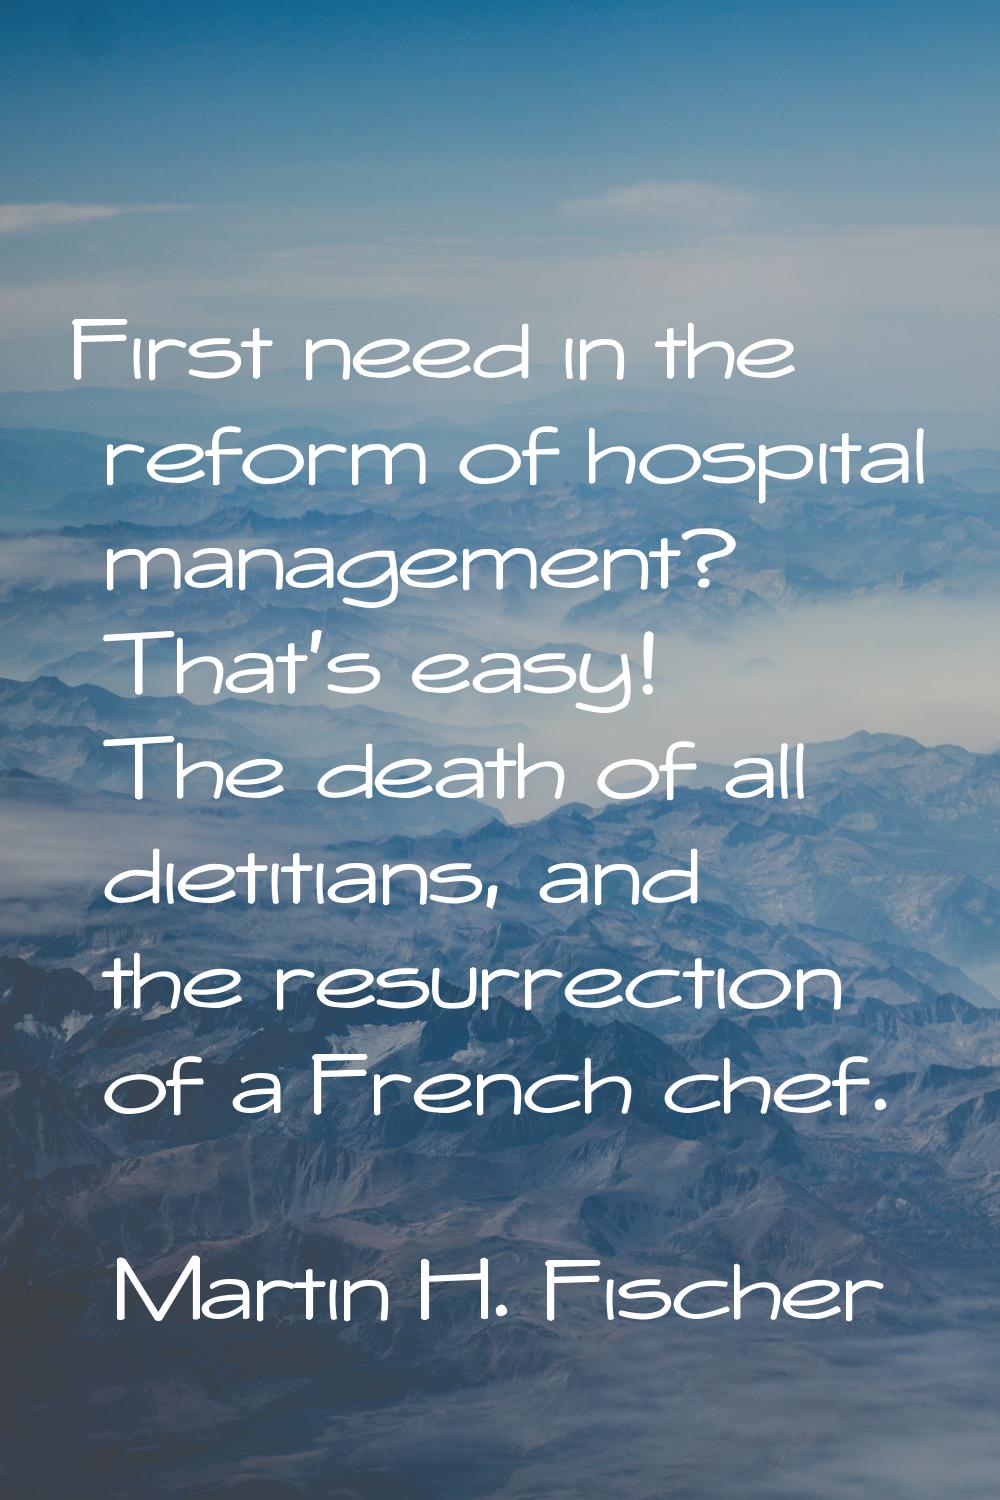 First need in the reform of hospital management? That's easy! The death of all dietitians, and the 